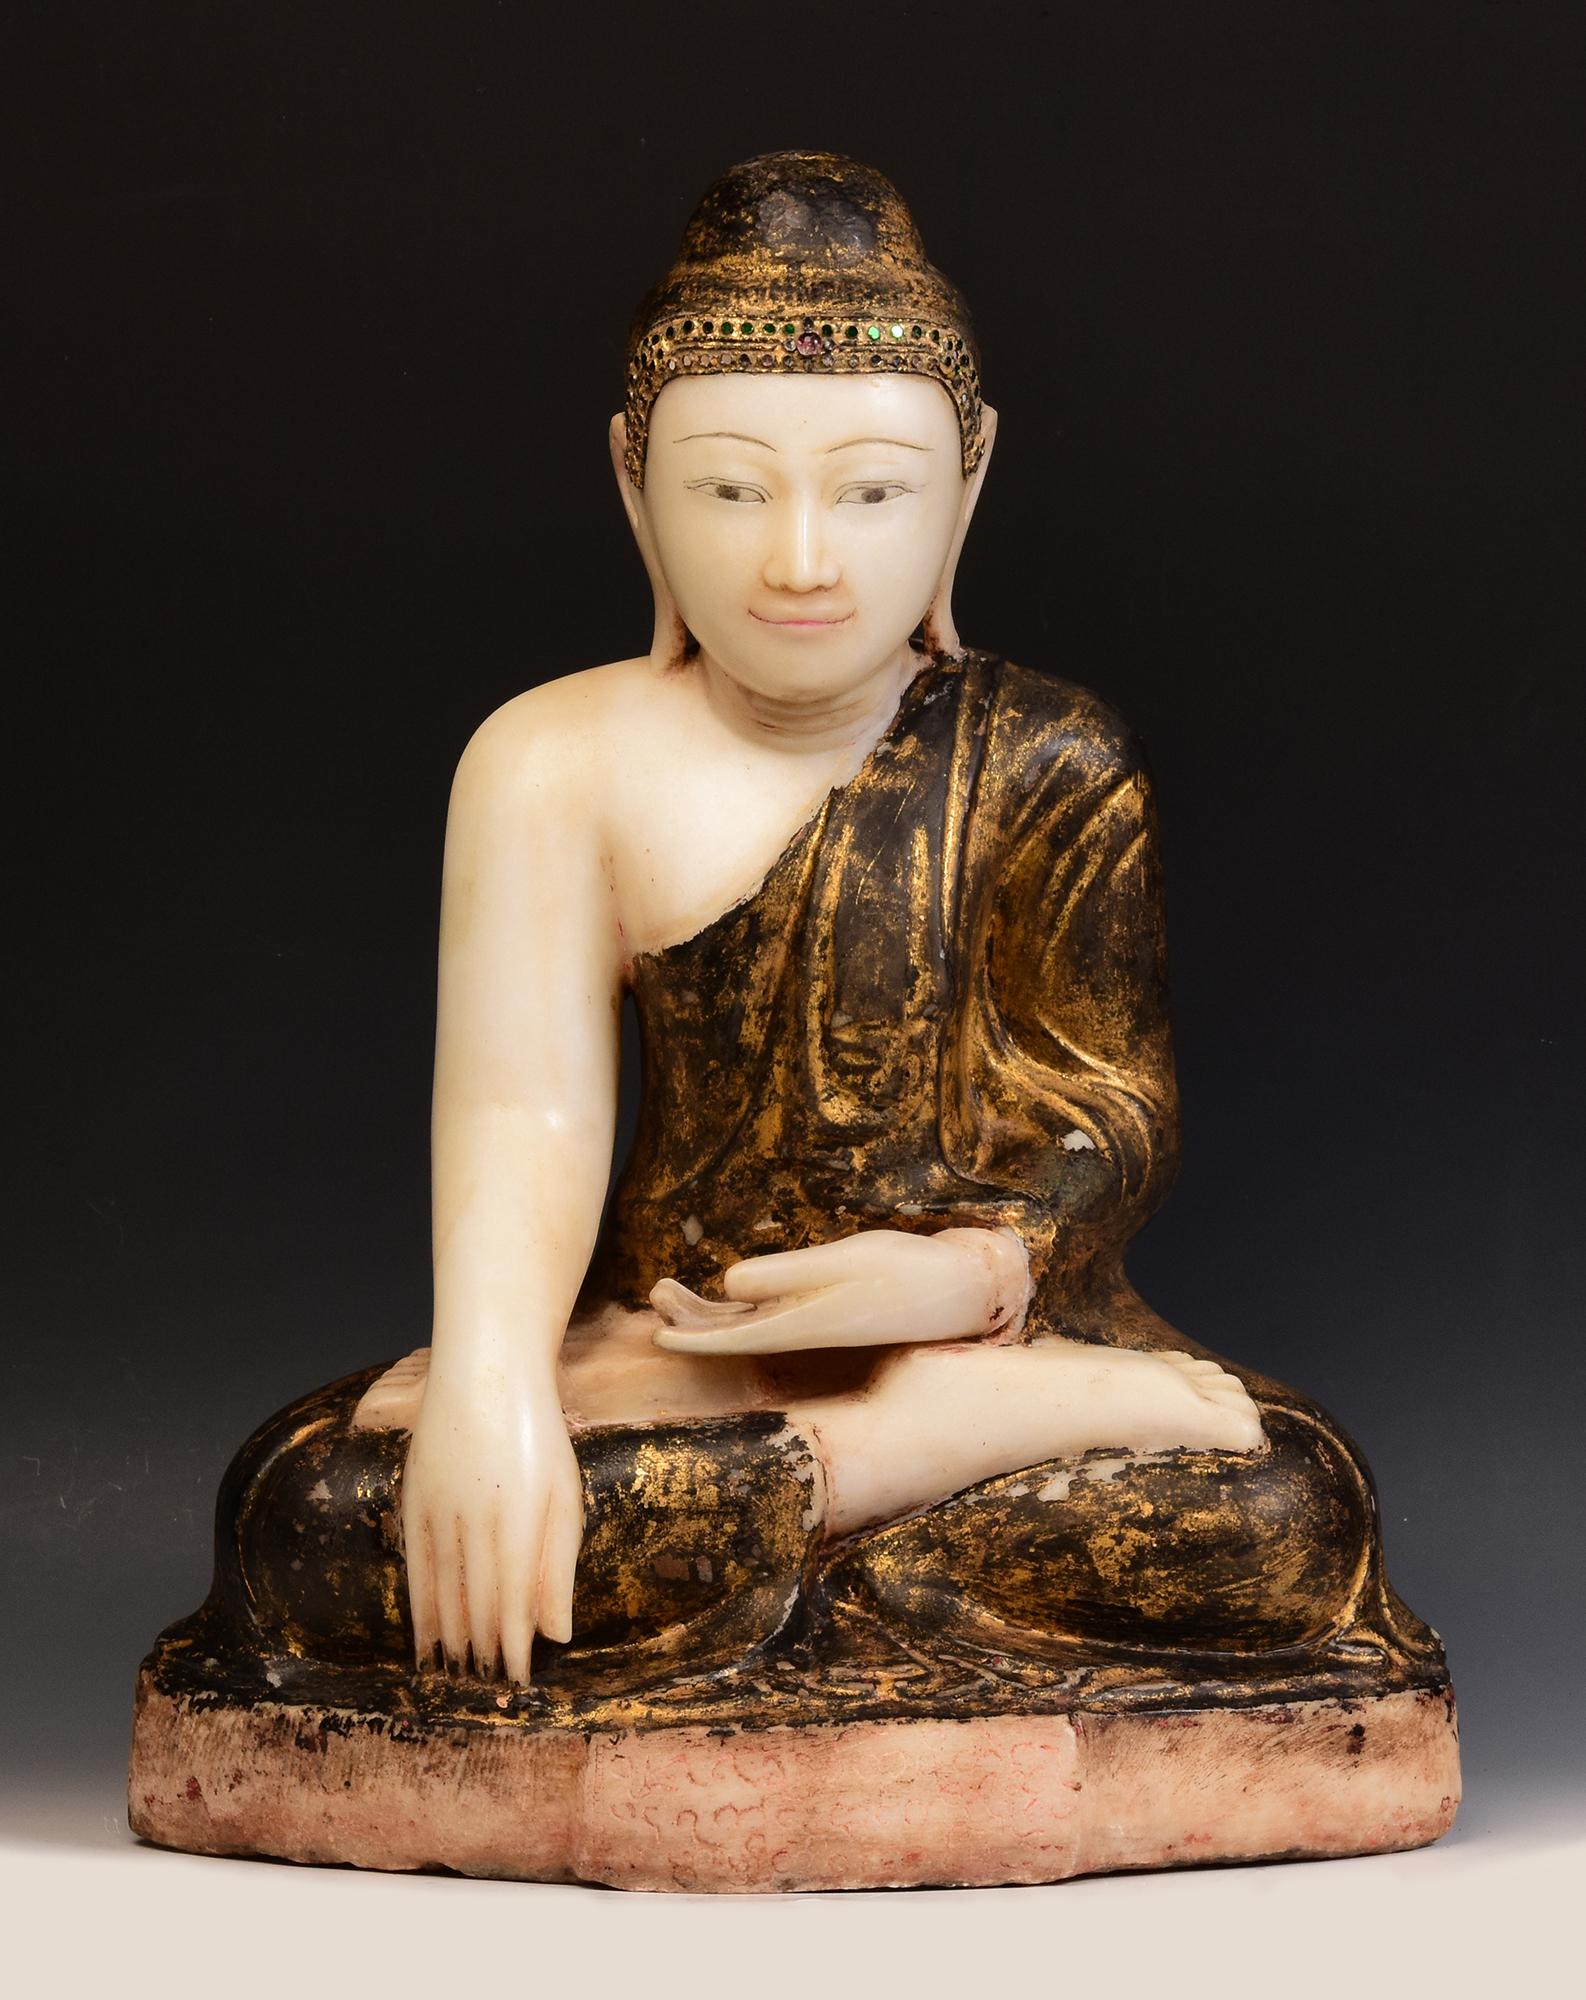 Antique Burmese alabaster Buddha sitting in Mara Vijaya (calling the earth to witness) posture on a base, with original lacquer and inlay of colorful glass pieces on the headband.

Age: Burma, Mandalay Period, 19th Century
Size: Height 58 C.M. /